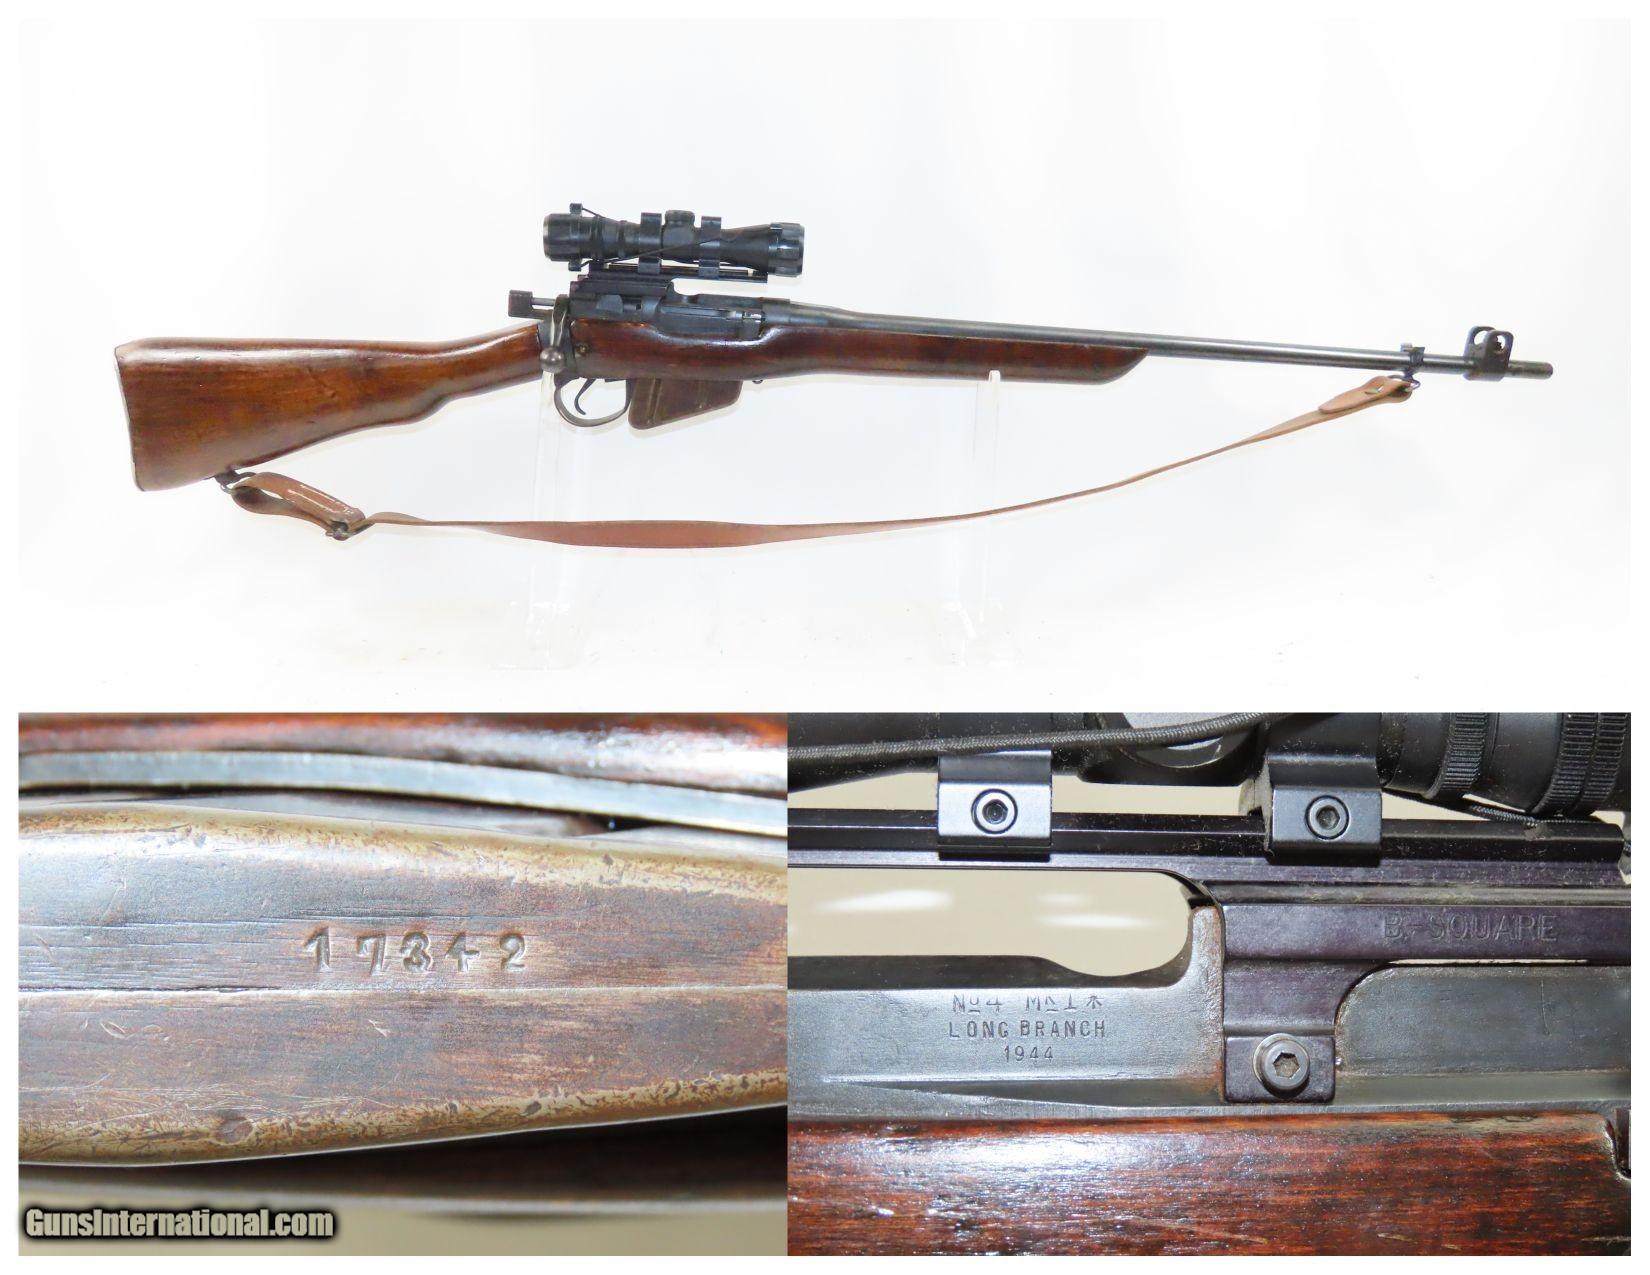 1944 Date WORLD WAR II Era LONG BRANCH Enfield No. 4 Mk1 C&R MILITARY Rifle  INFANTRY Weapon of ENGLAND & CANADA with SCOPE